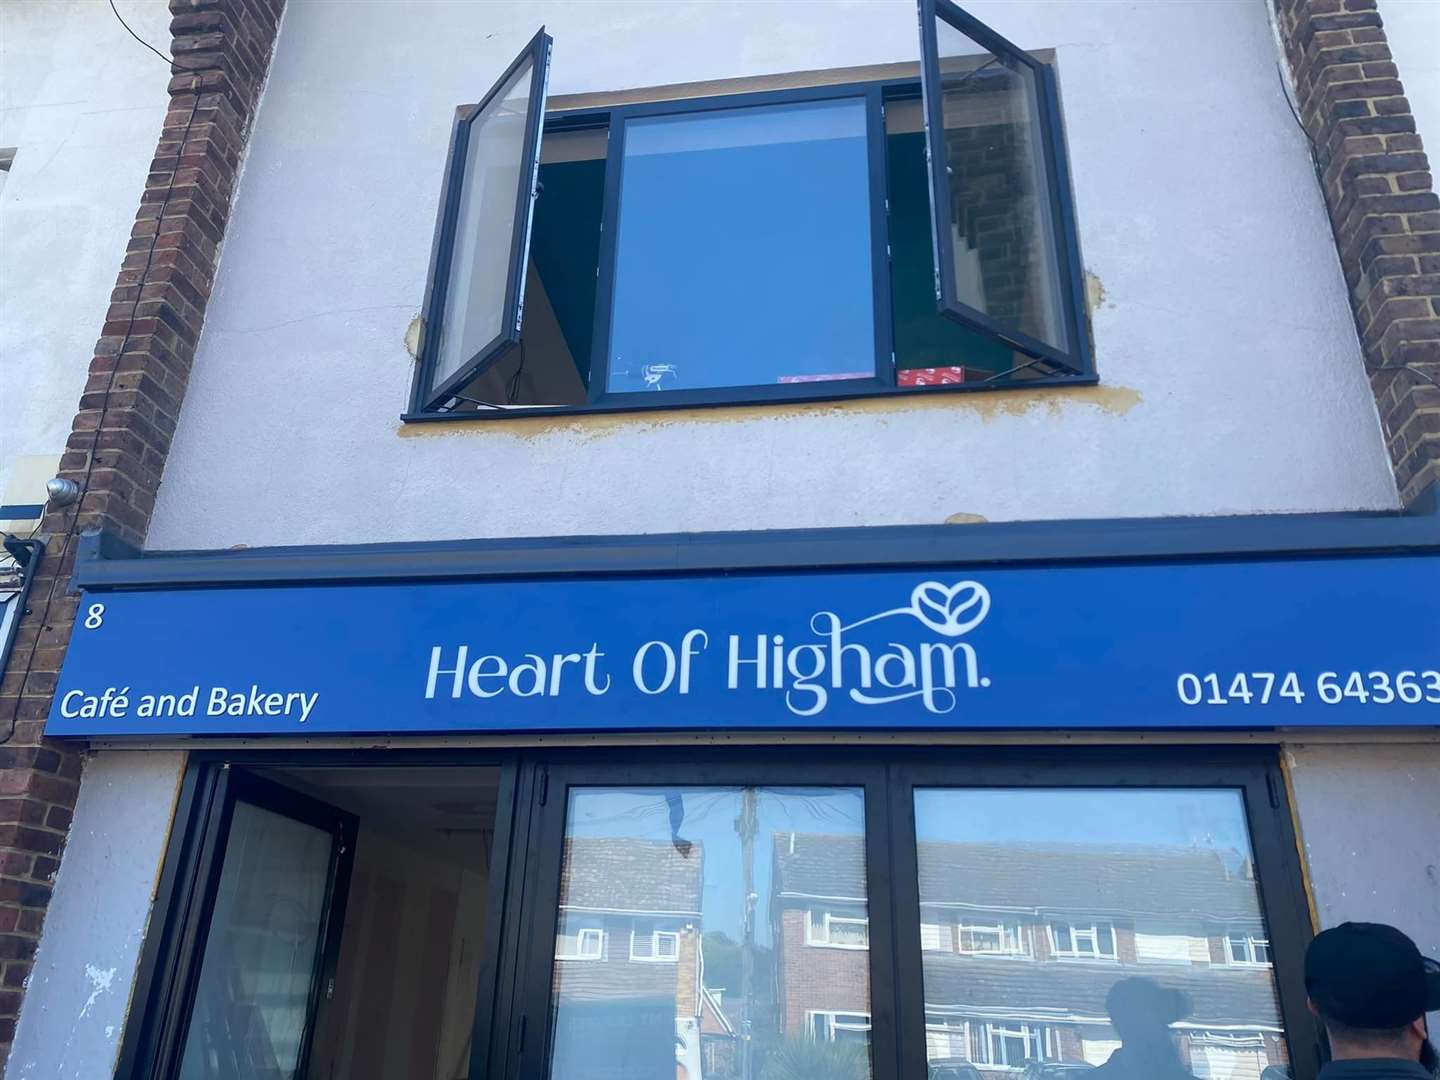 The café will open in the village's former bakery. Picture: Helen Donovan